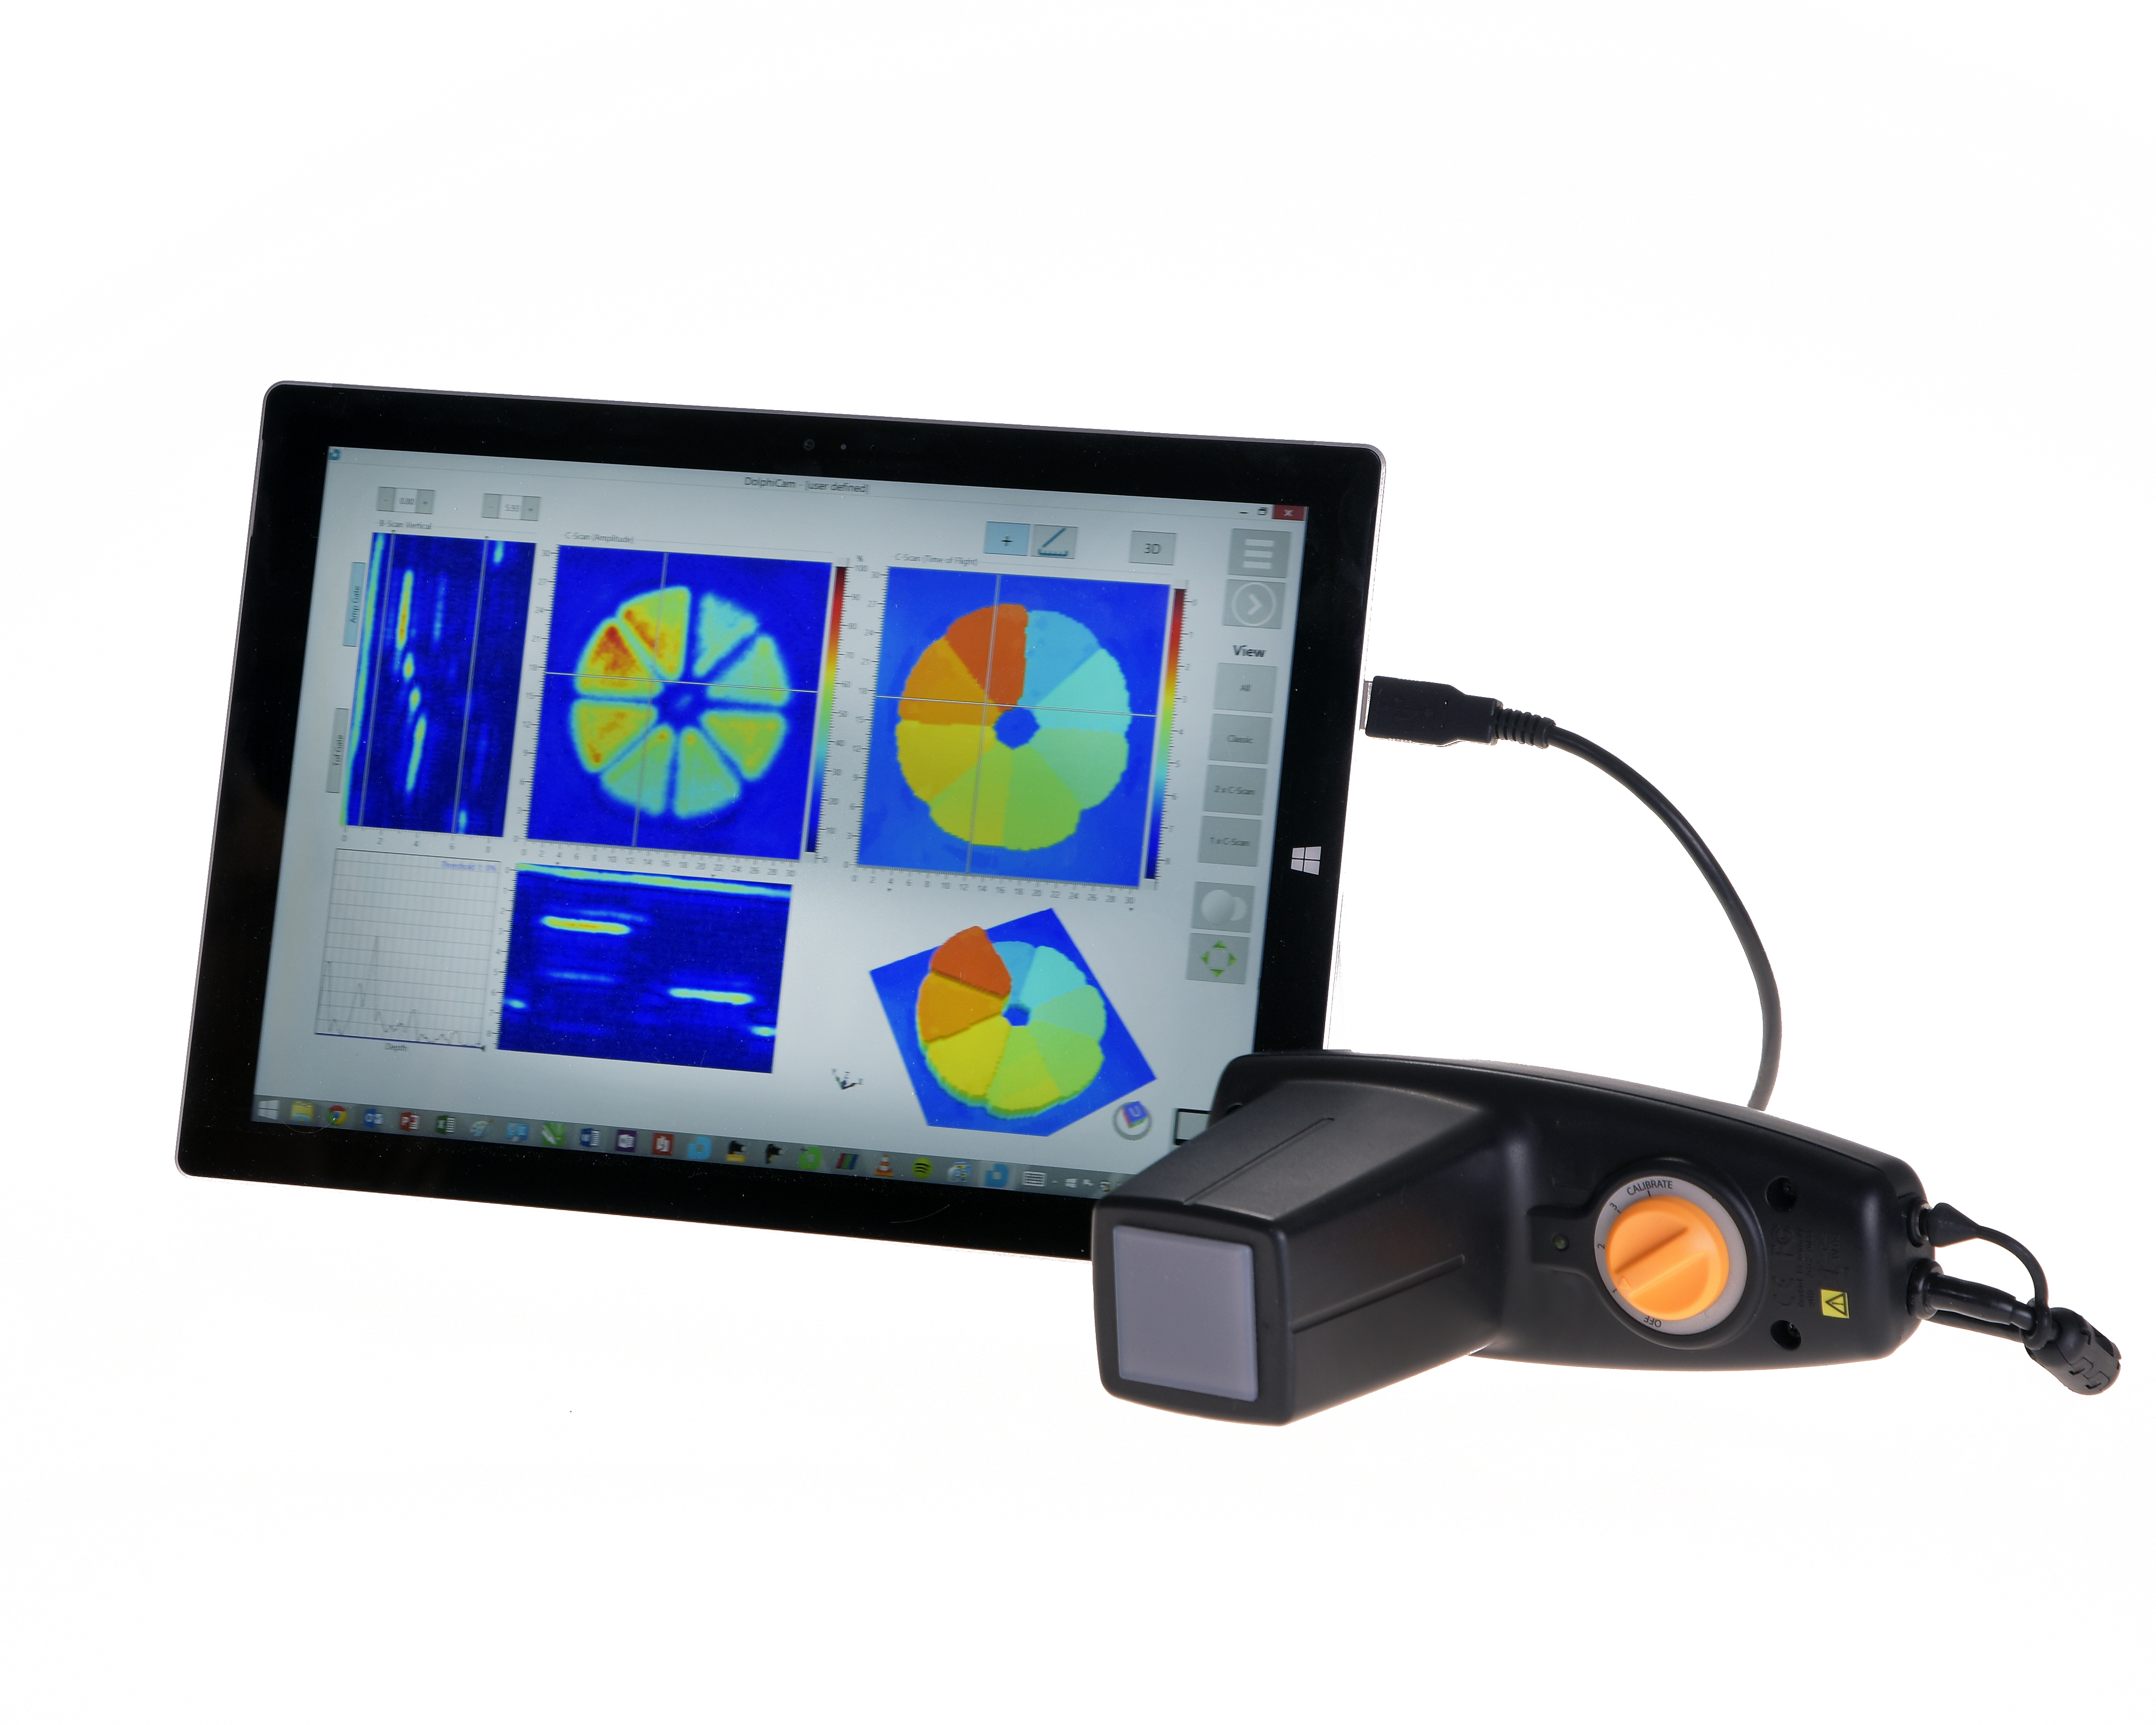 The DolphiCam NDT system detects impact damages, delamination and debonding defects in carbon fiber structures.